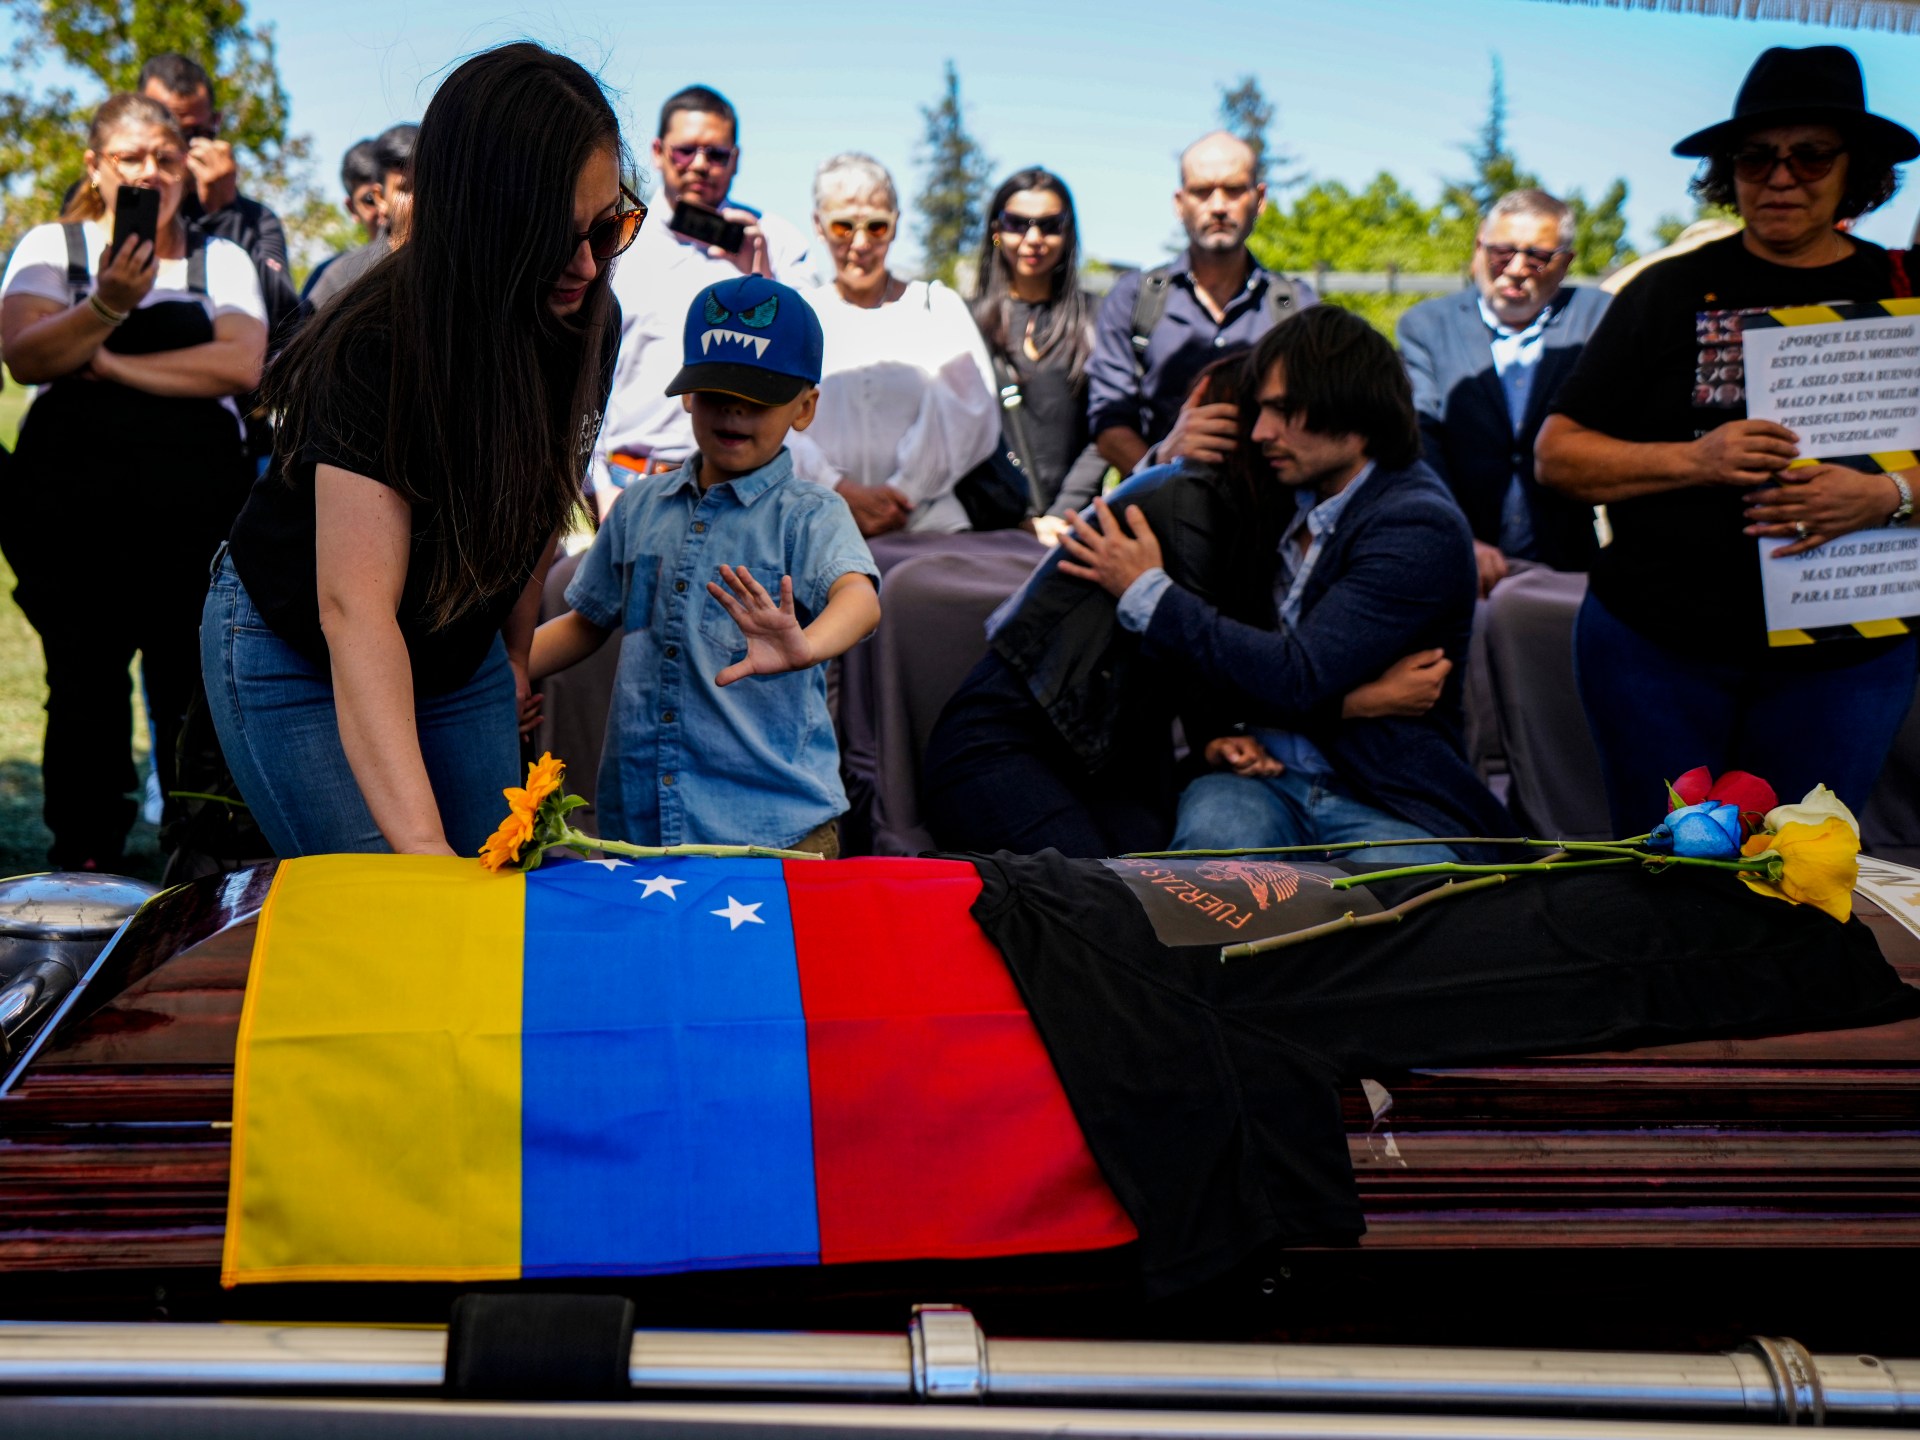 QnA VBage Chile calls for the extradition of Venezuelans after dissident’s murder